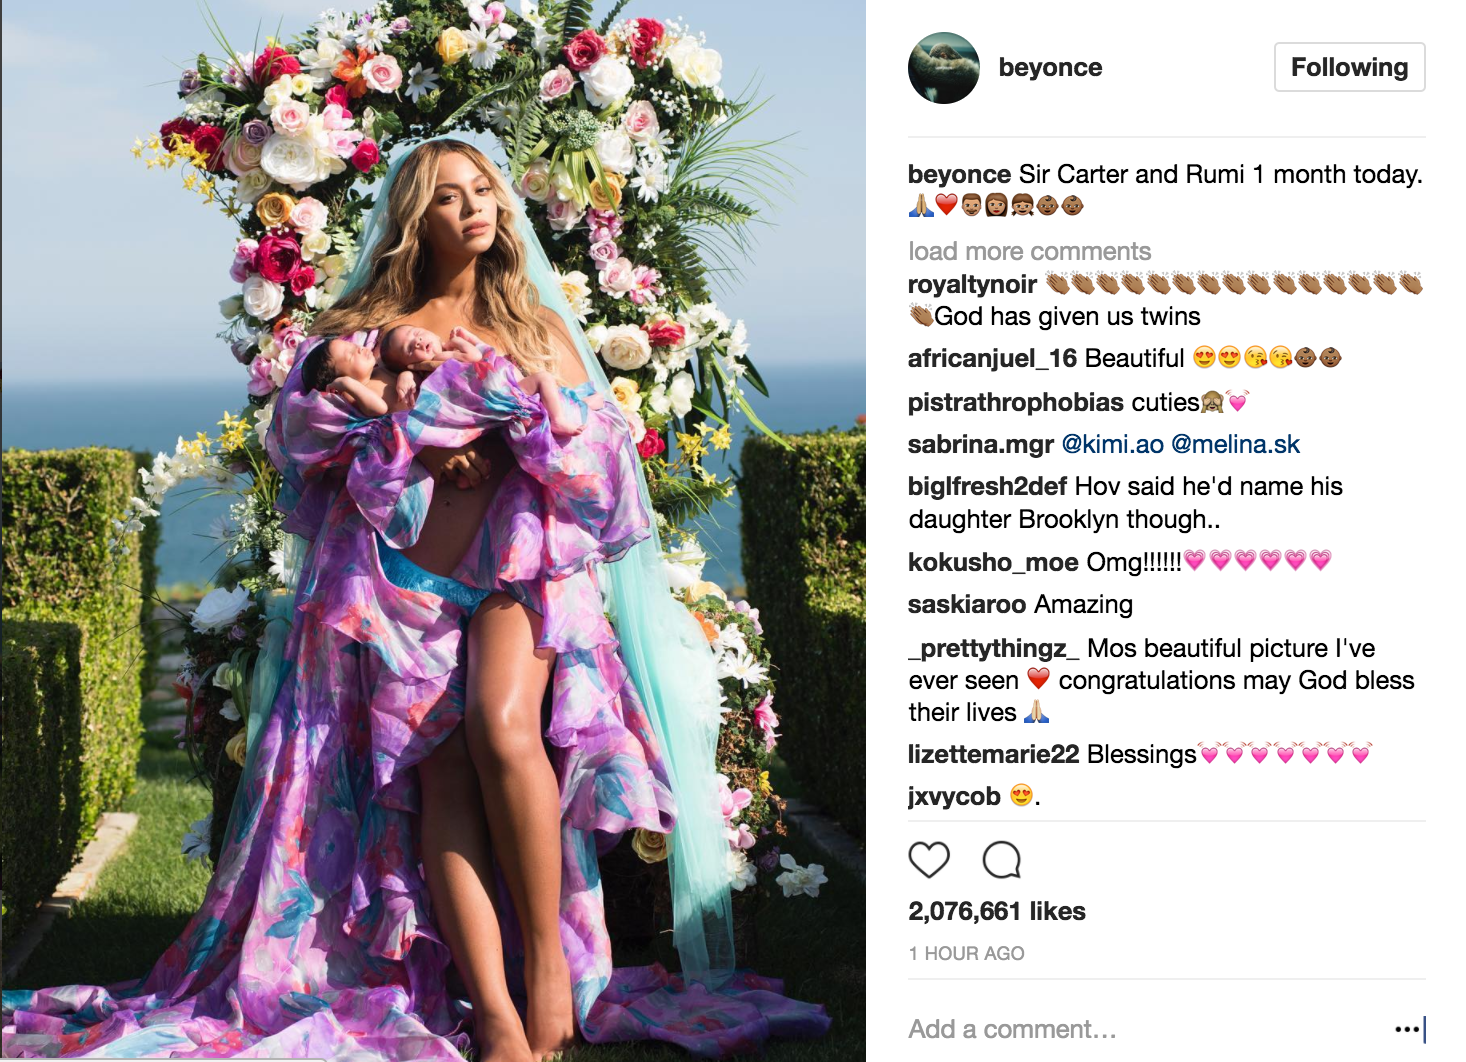 &#13;
Beyonce poses with her month-old twins Rumi and Sir Carter &#13;